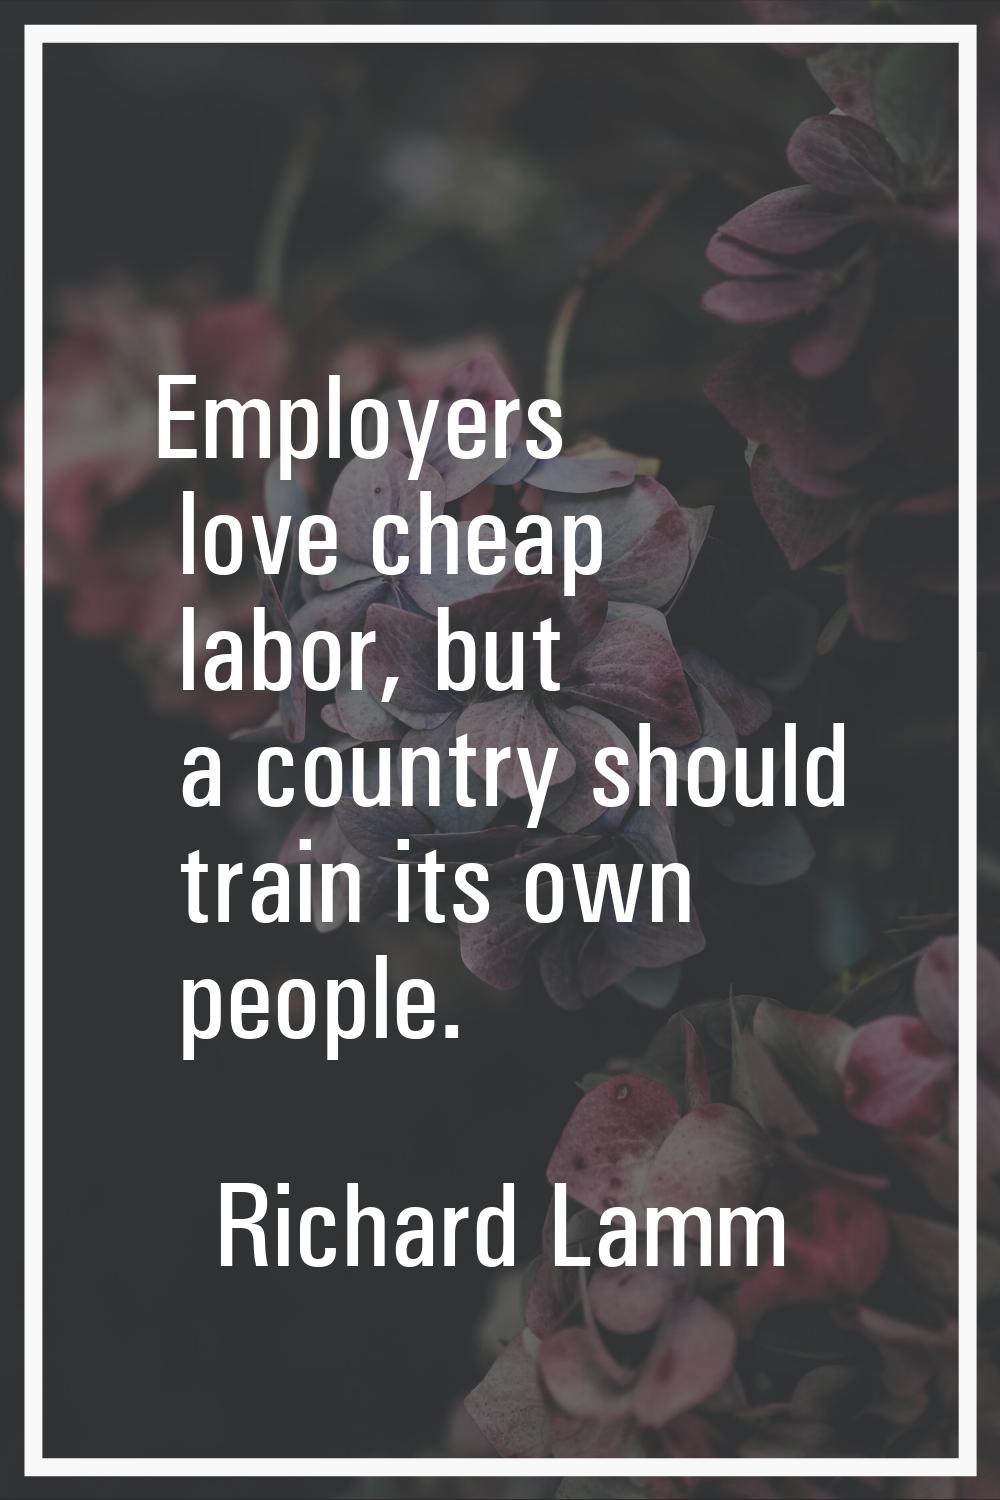 Employers love cheap labor, but a country should train its own people.